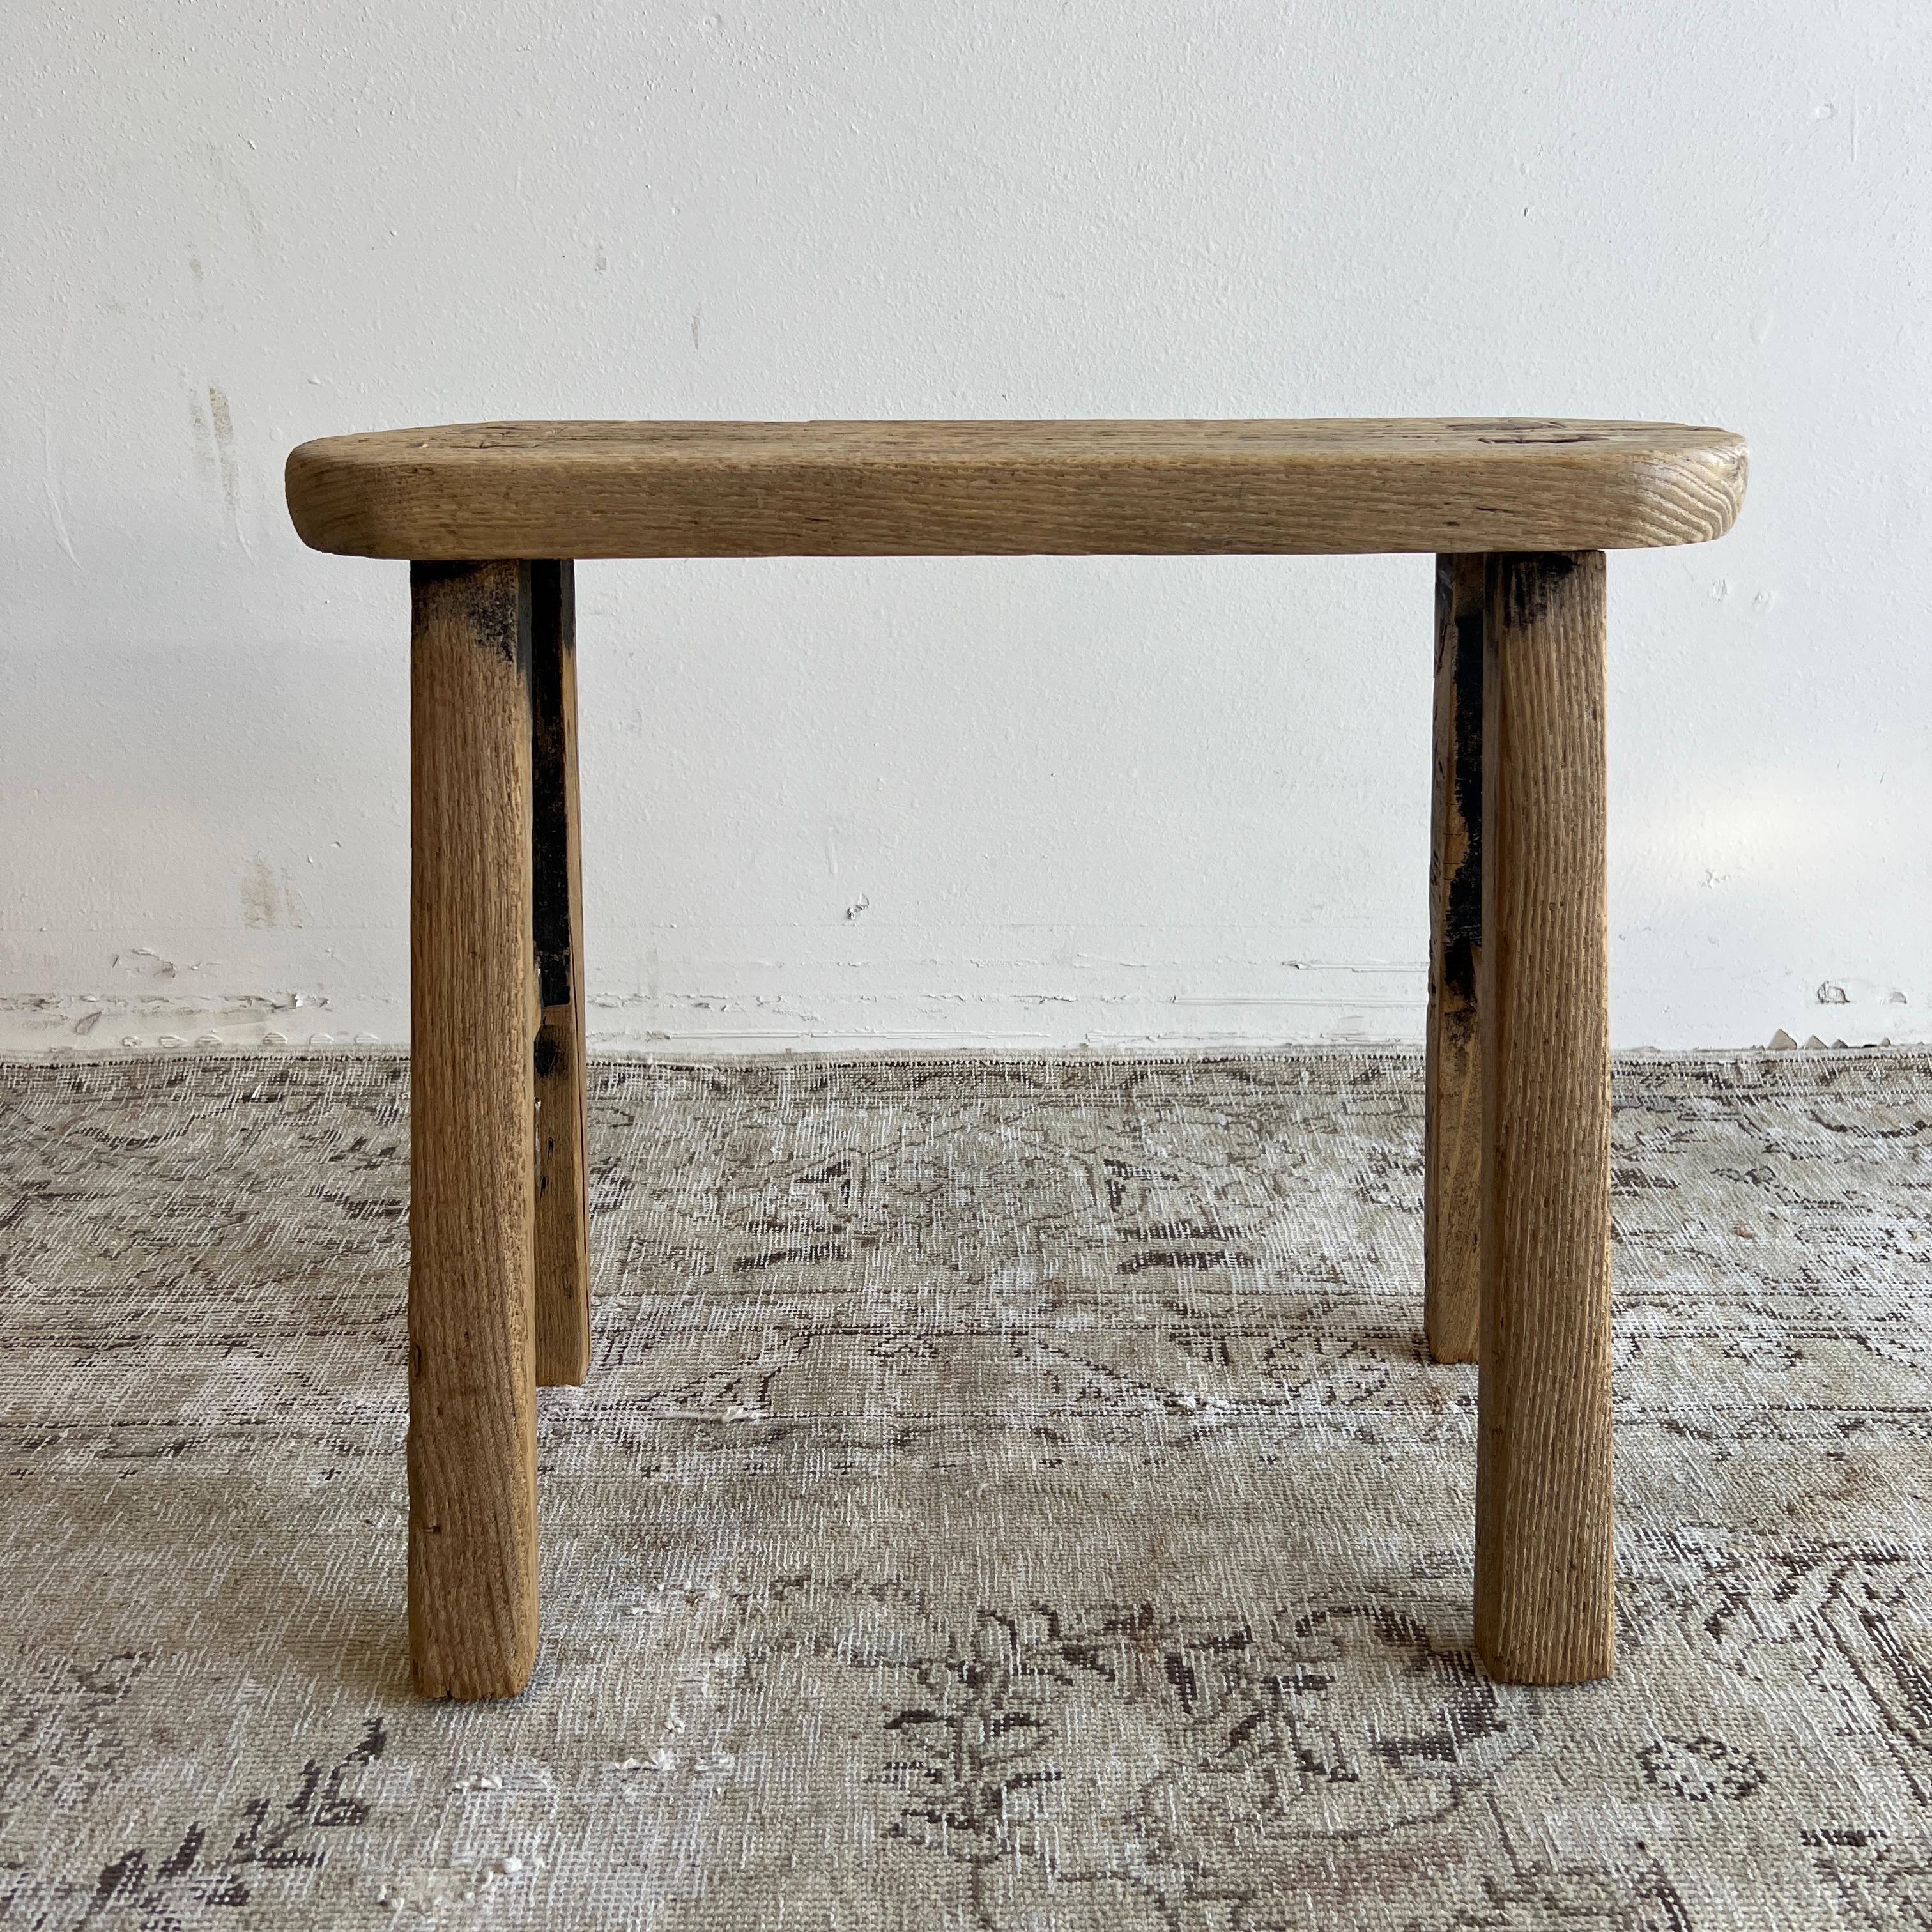 These are the real vintage antique elm wood stools! Beautiful antique patina, with weathering and age, these are solid and sturdy ready for daily use, use as a table, stool, drink table, they are great for any space.
Size: 20